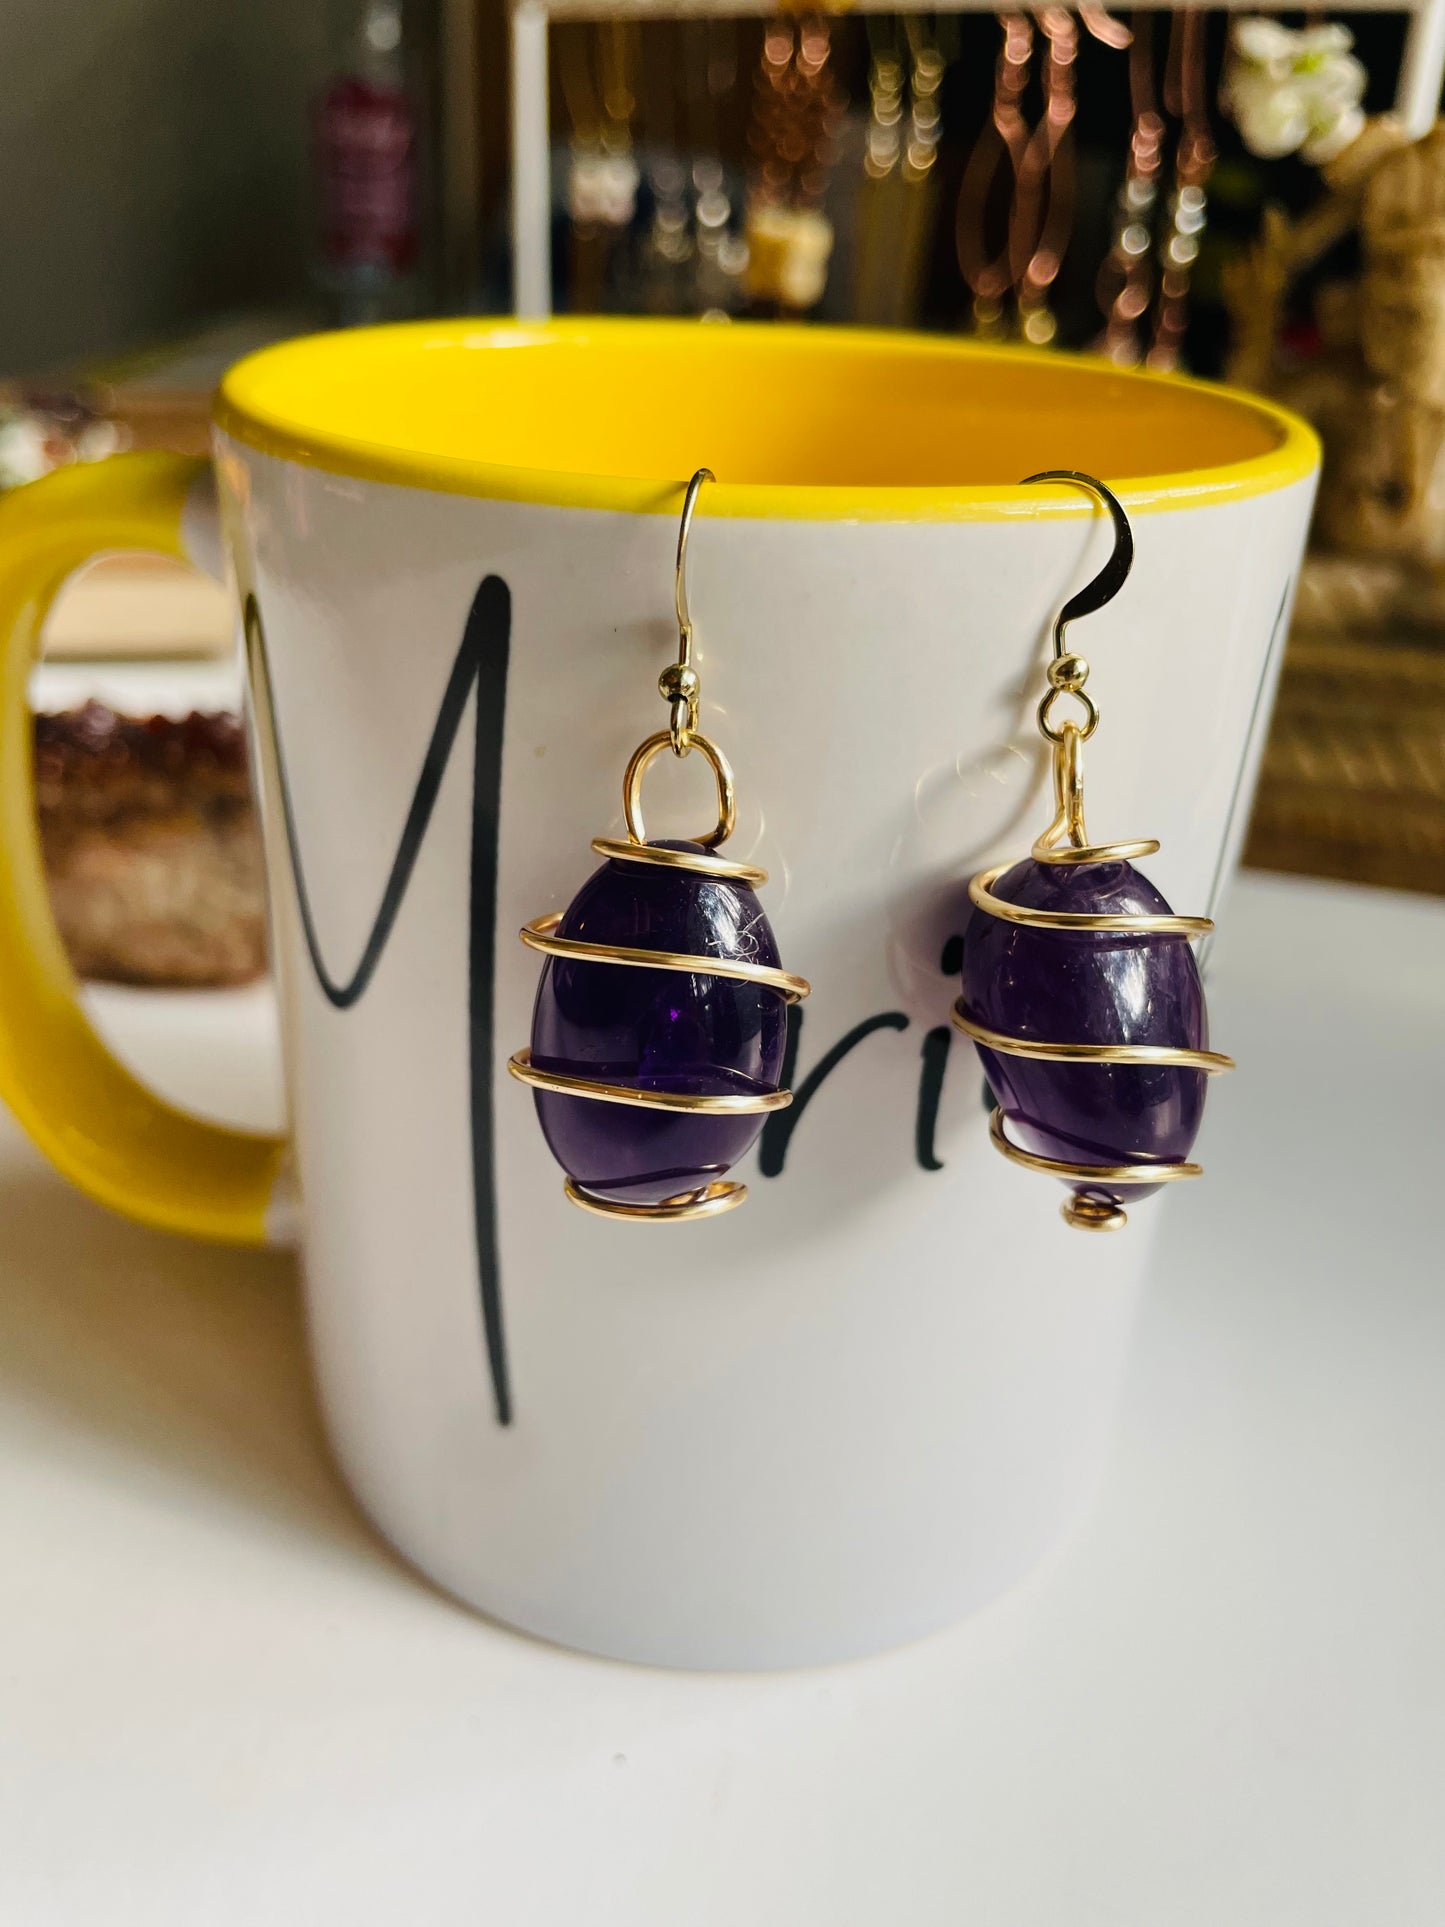 Amethyst Crystals Wrapped in Gold Earrings